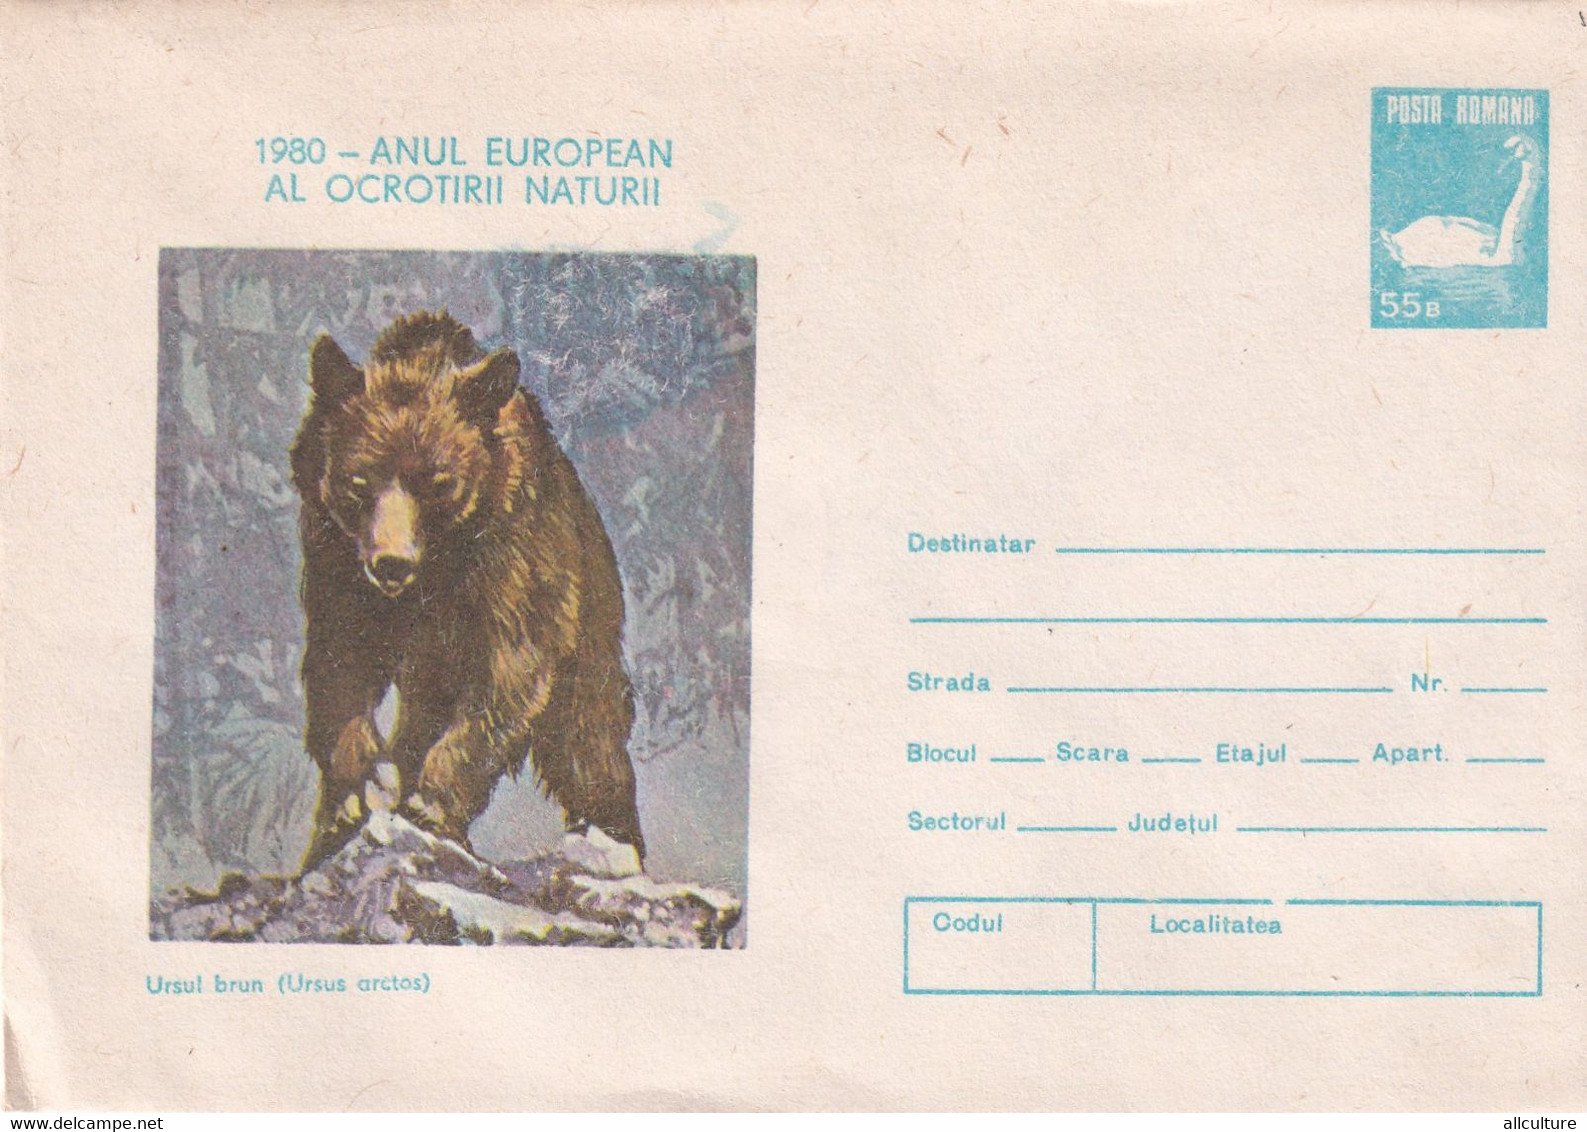 A3139 - The Brown Bear (ursus Arctos) European Year Of Nature Protection 1980 Romania Posta Romana Cover Stationery - Beren